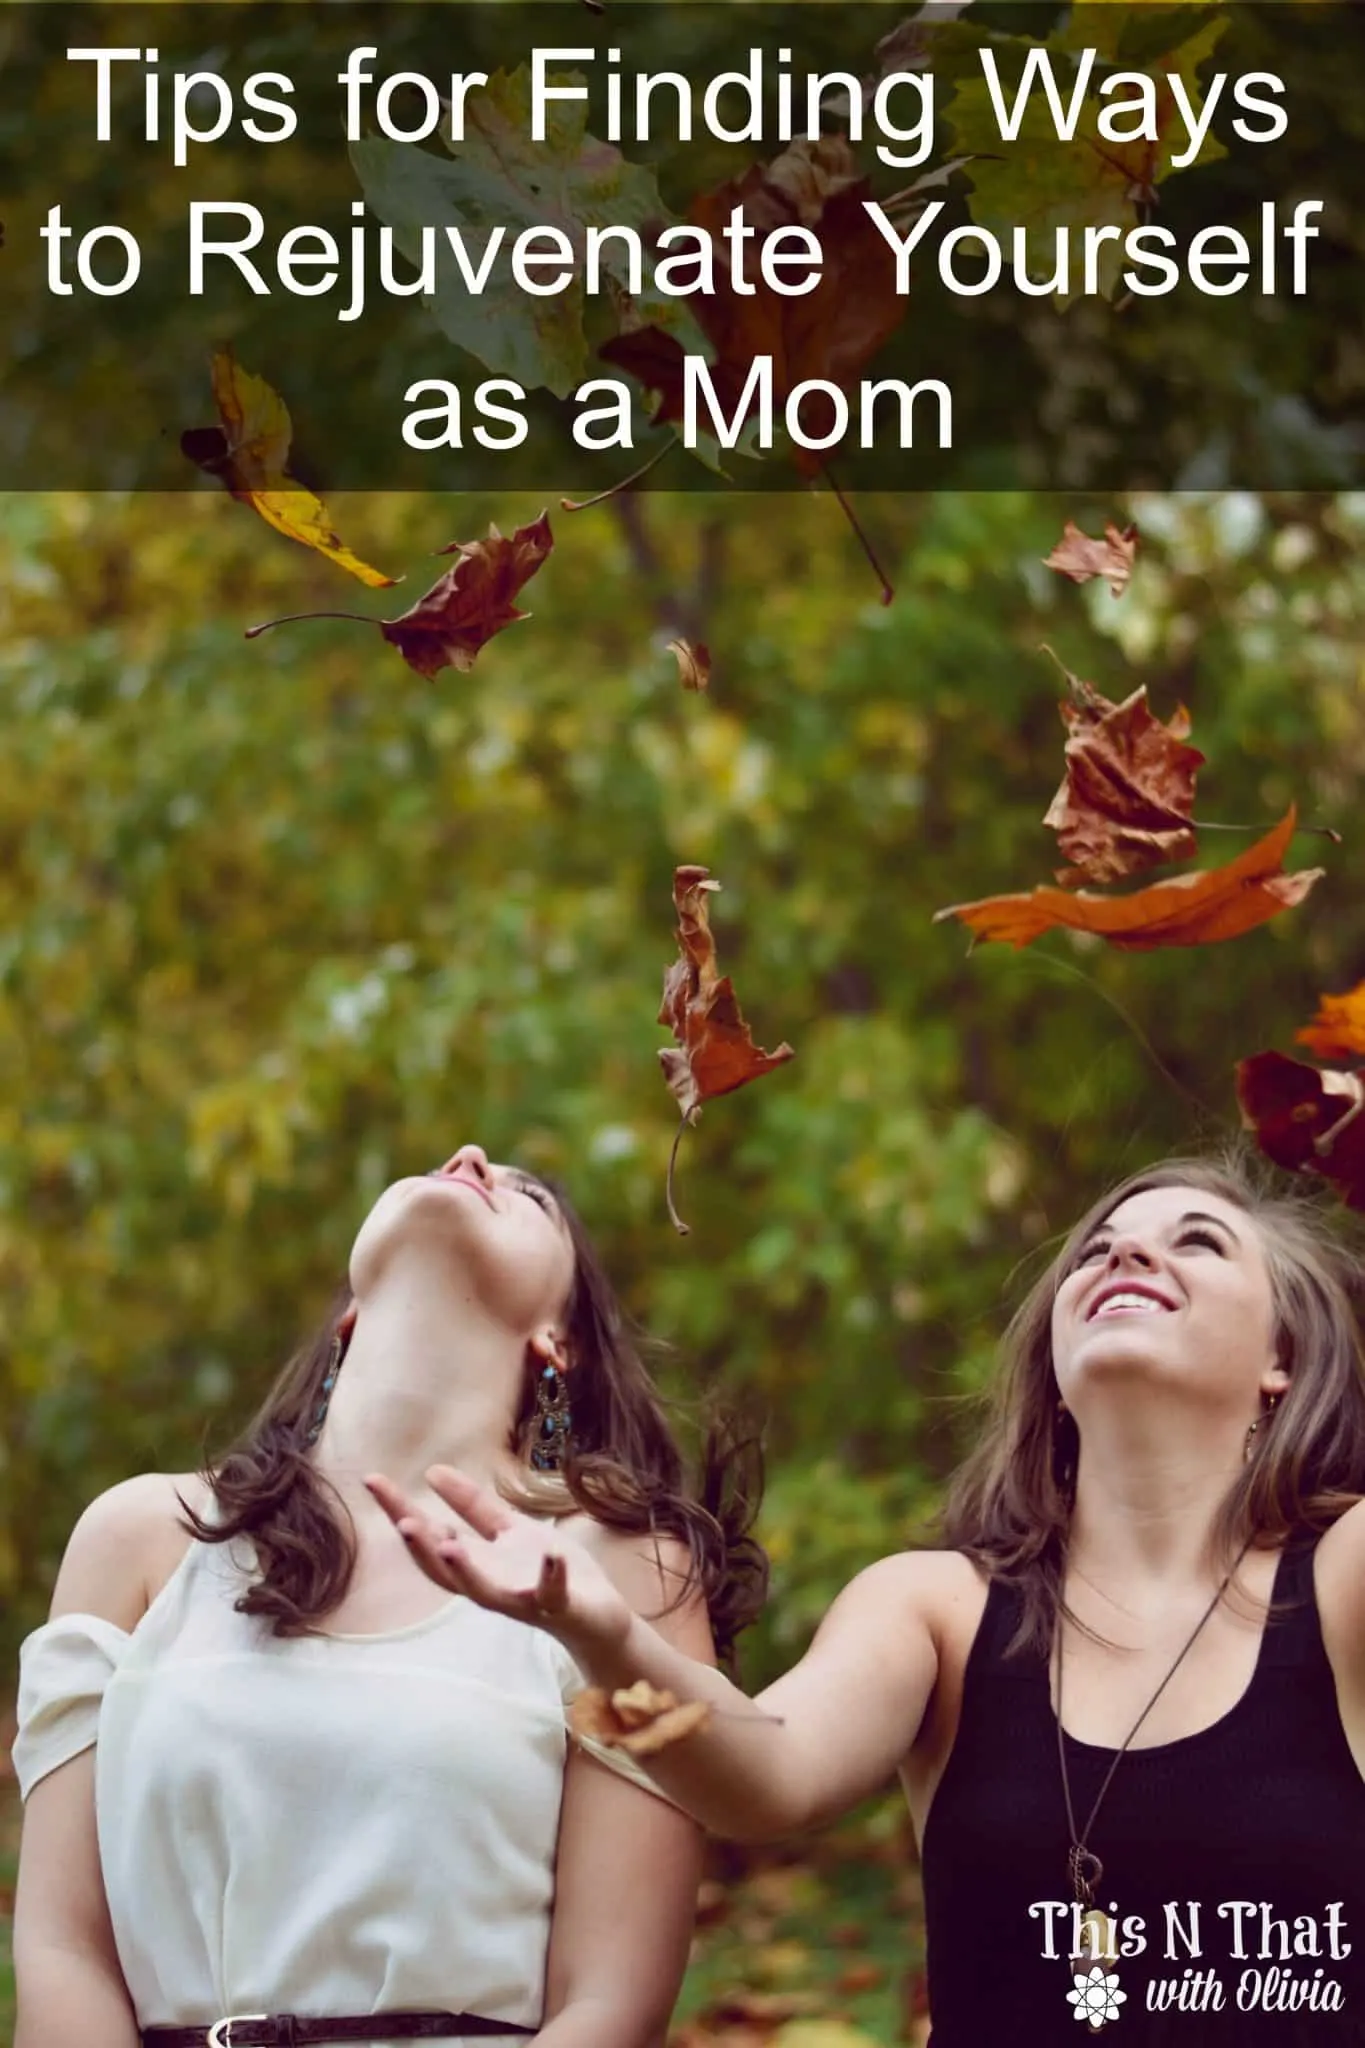 Tips for Finding Ways to Rejuvenate Yourself as a Mom